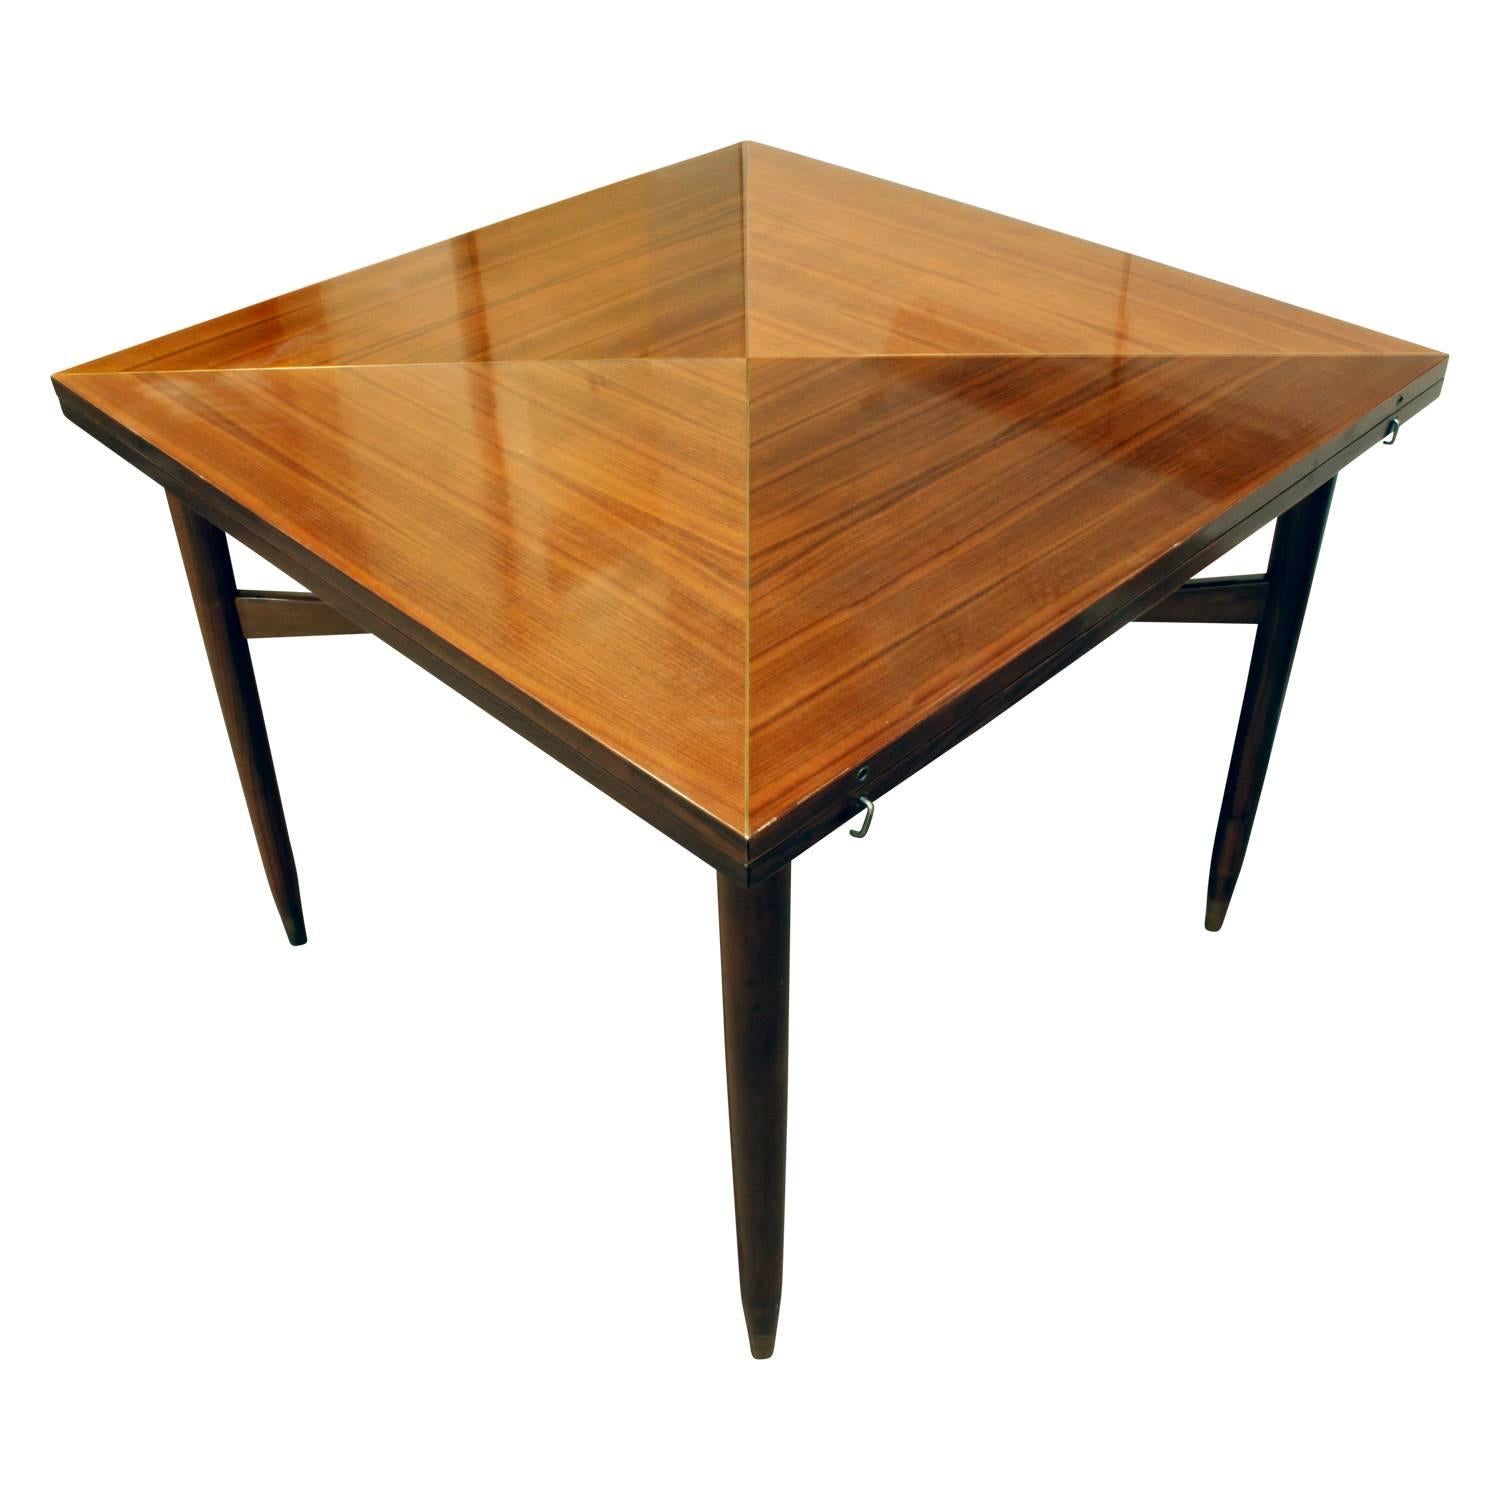 Rare flip-top game table in mahogany with brass inlays by Tommi Pariznger for Parzinger Originals, American, 1950s. This table is 72 inches wide when open.